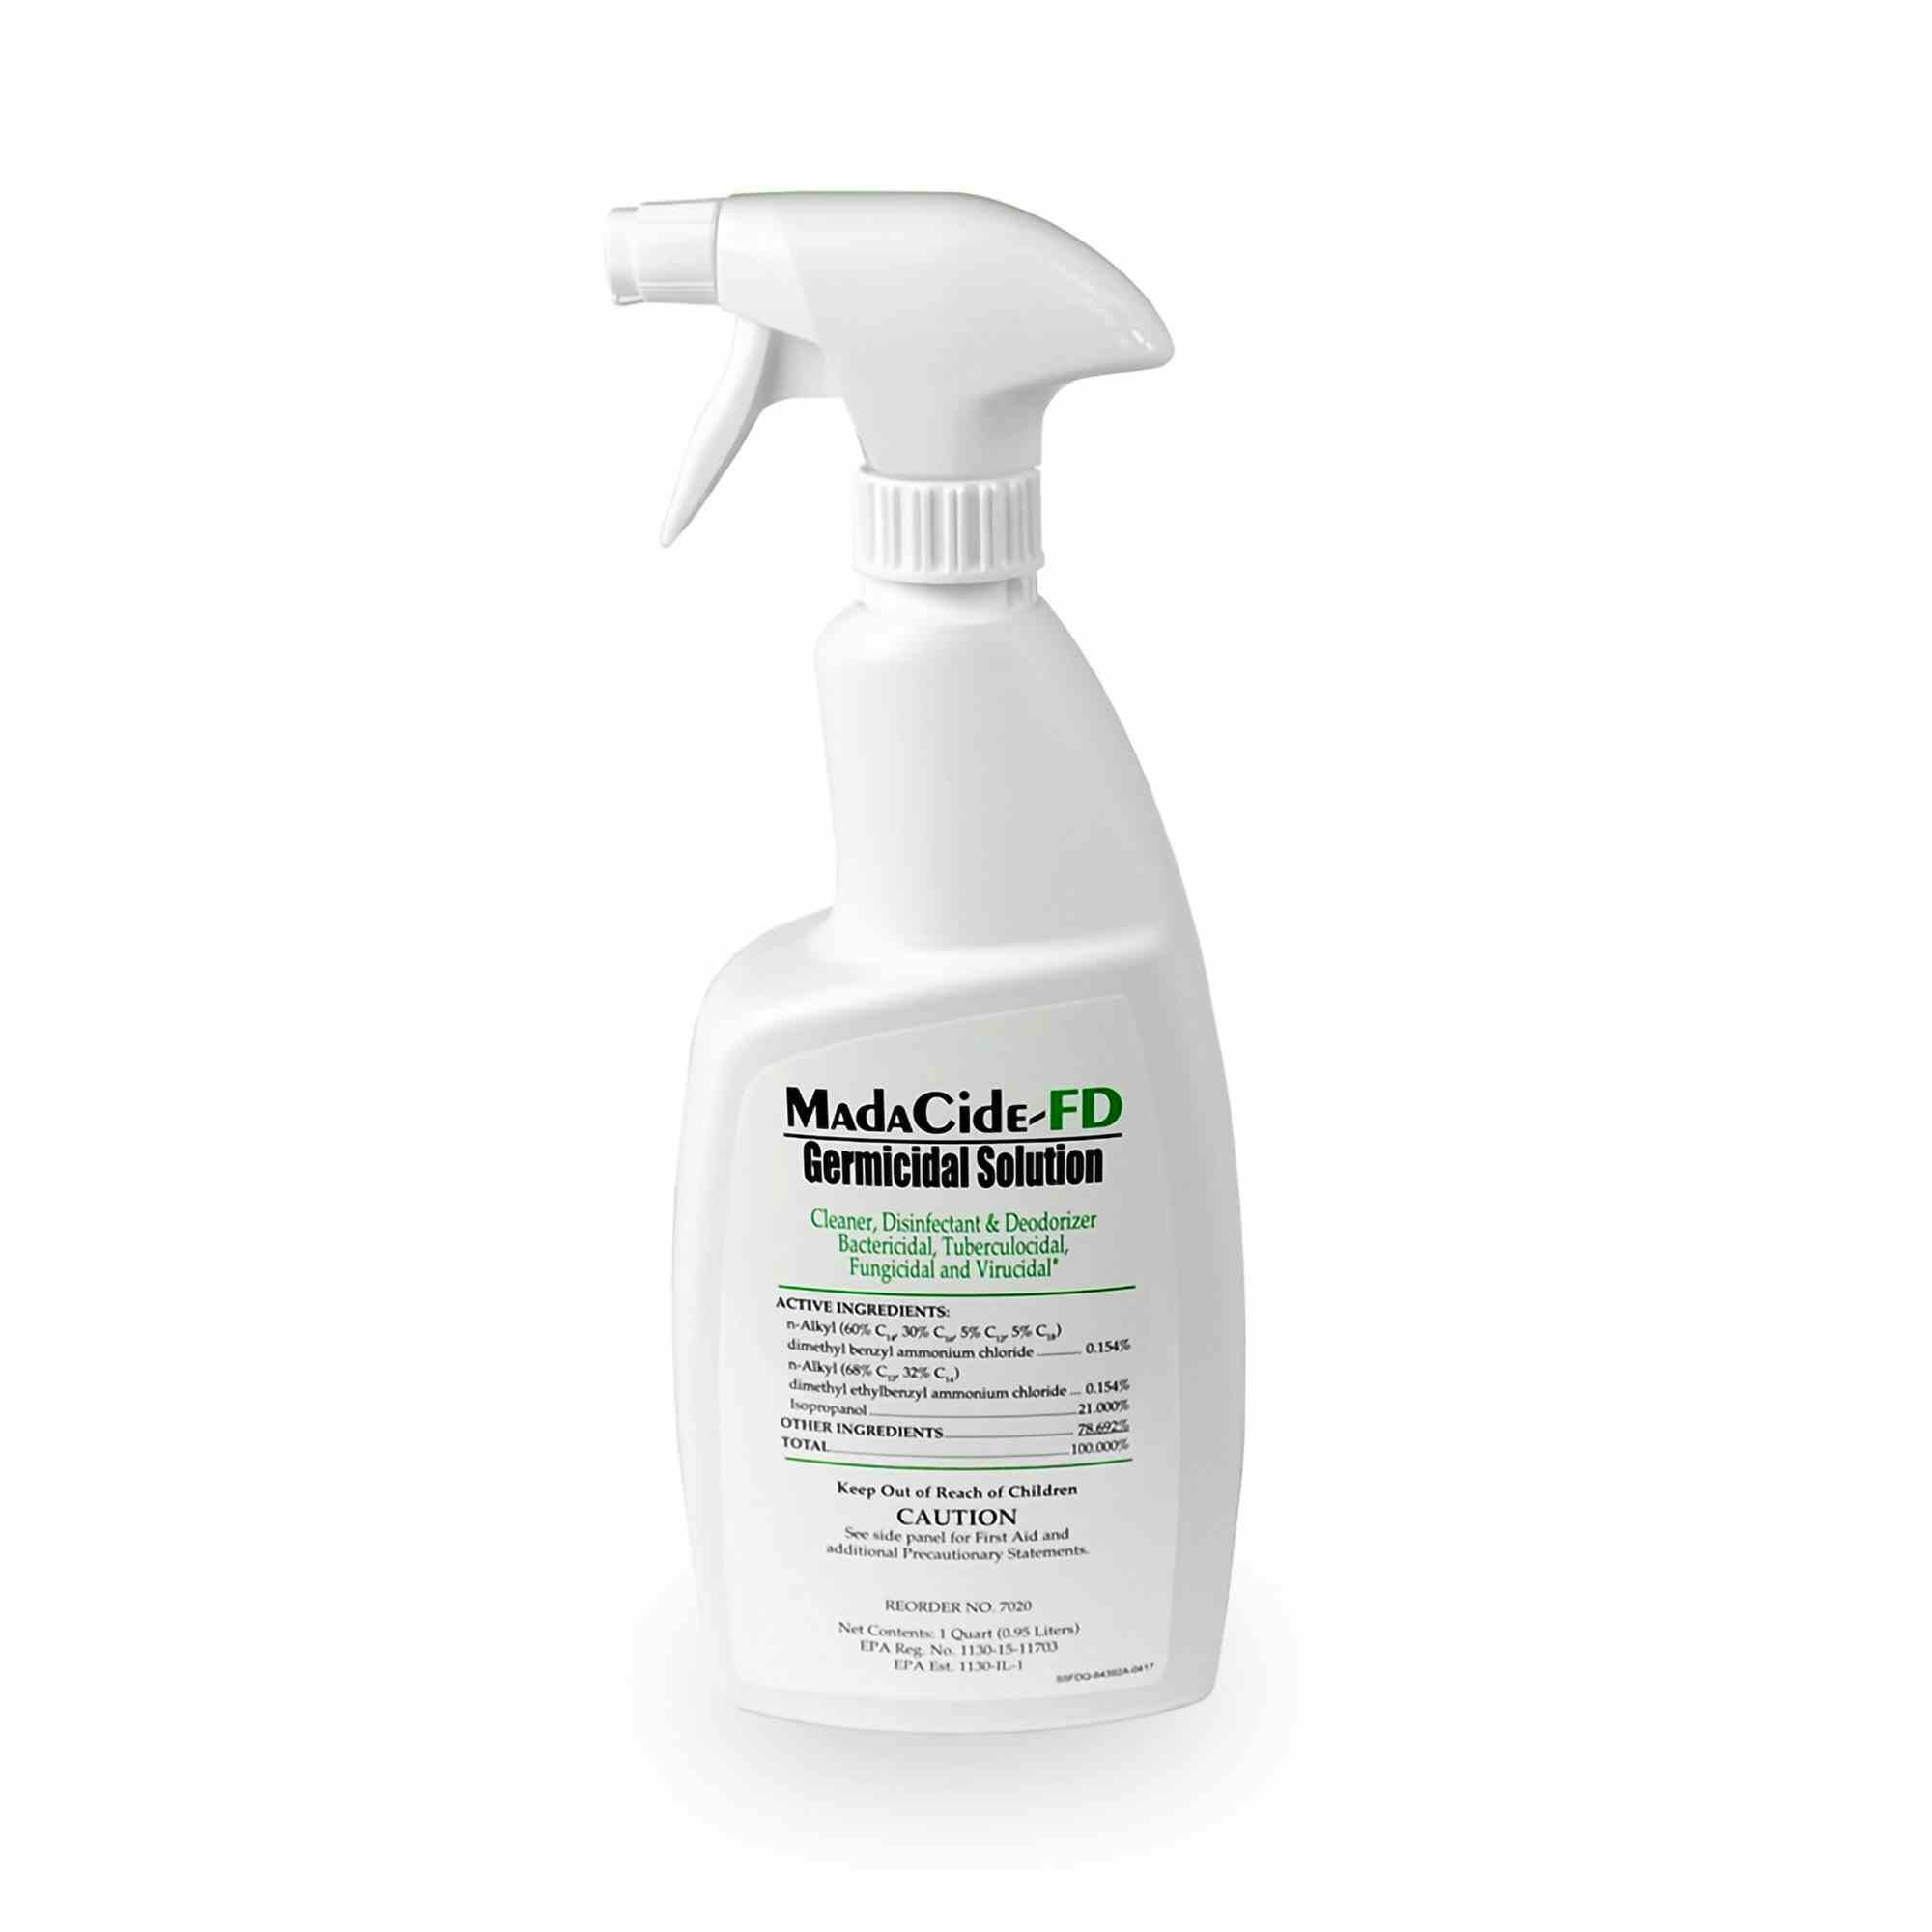 MadaCide-FD Germicidal Solution Cleaner, Disinfectant & Deodorizer, 32 oz., 7020, 1 Each